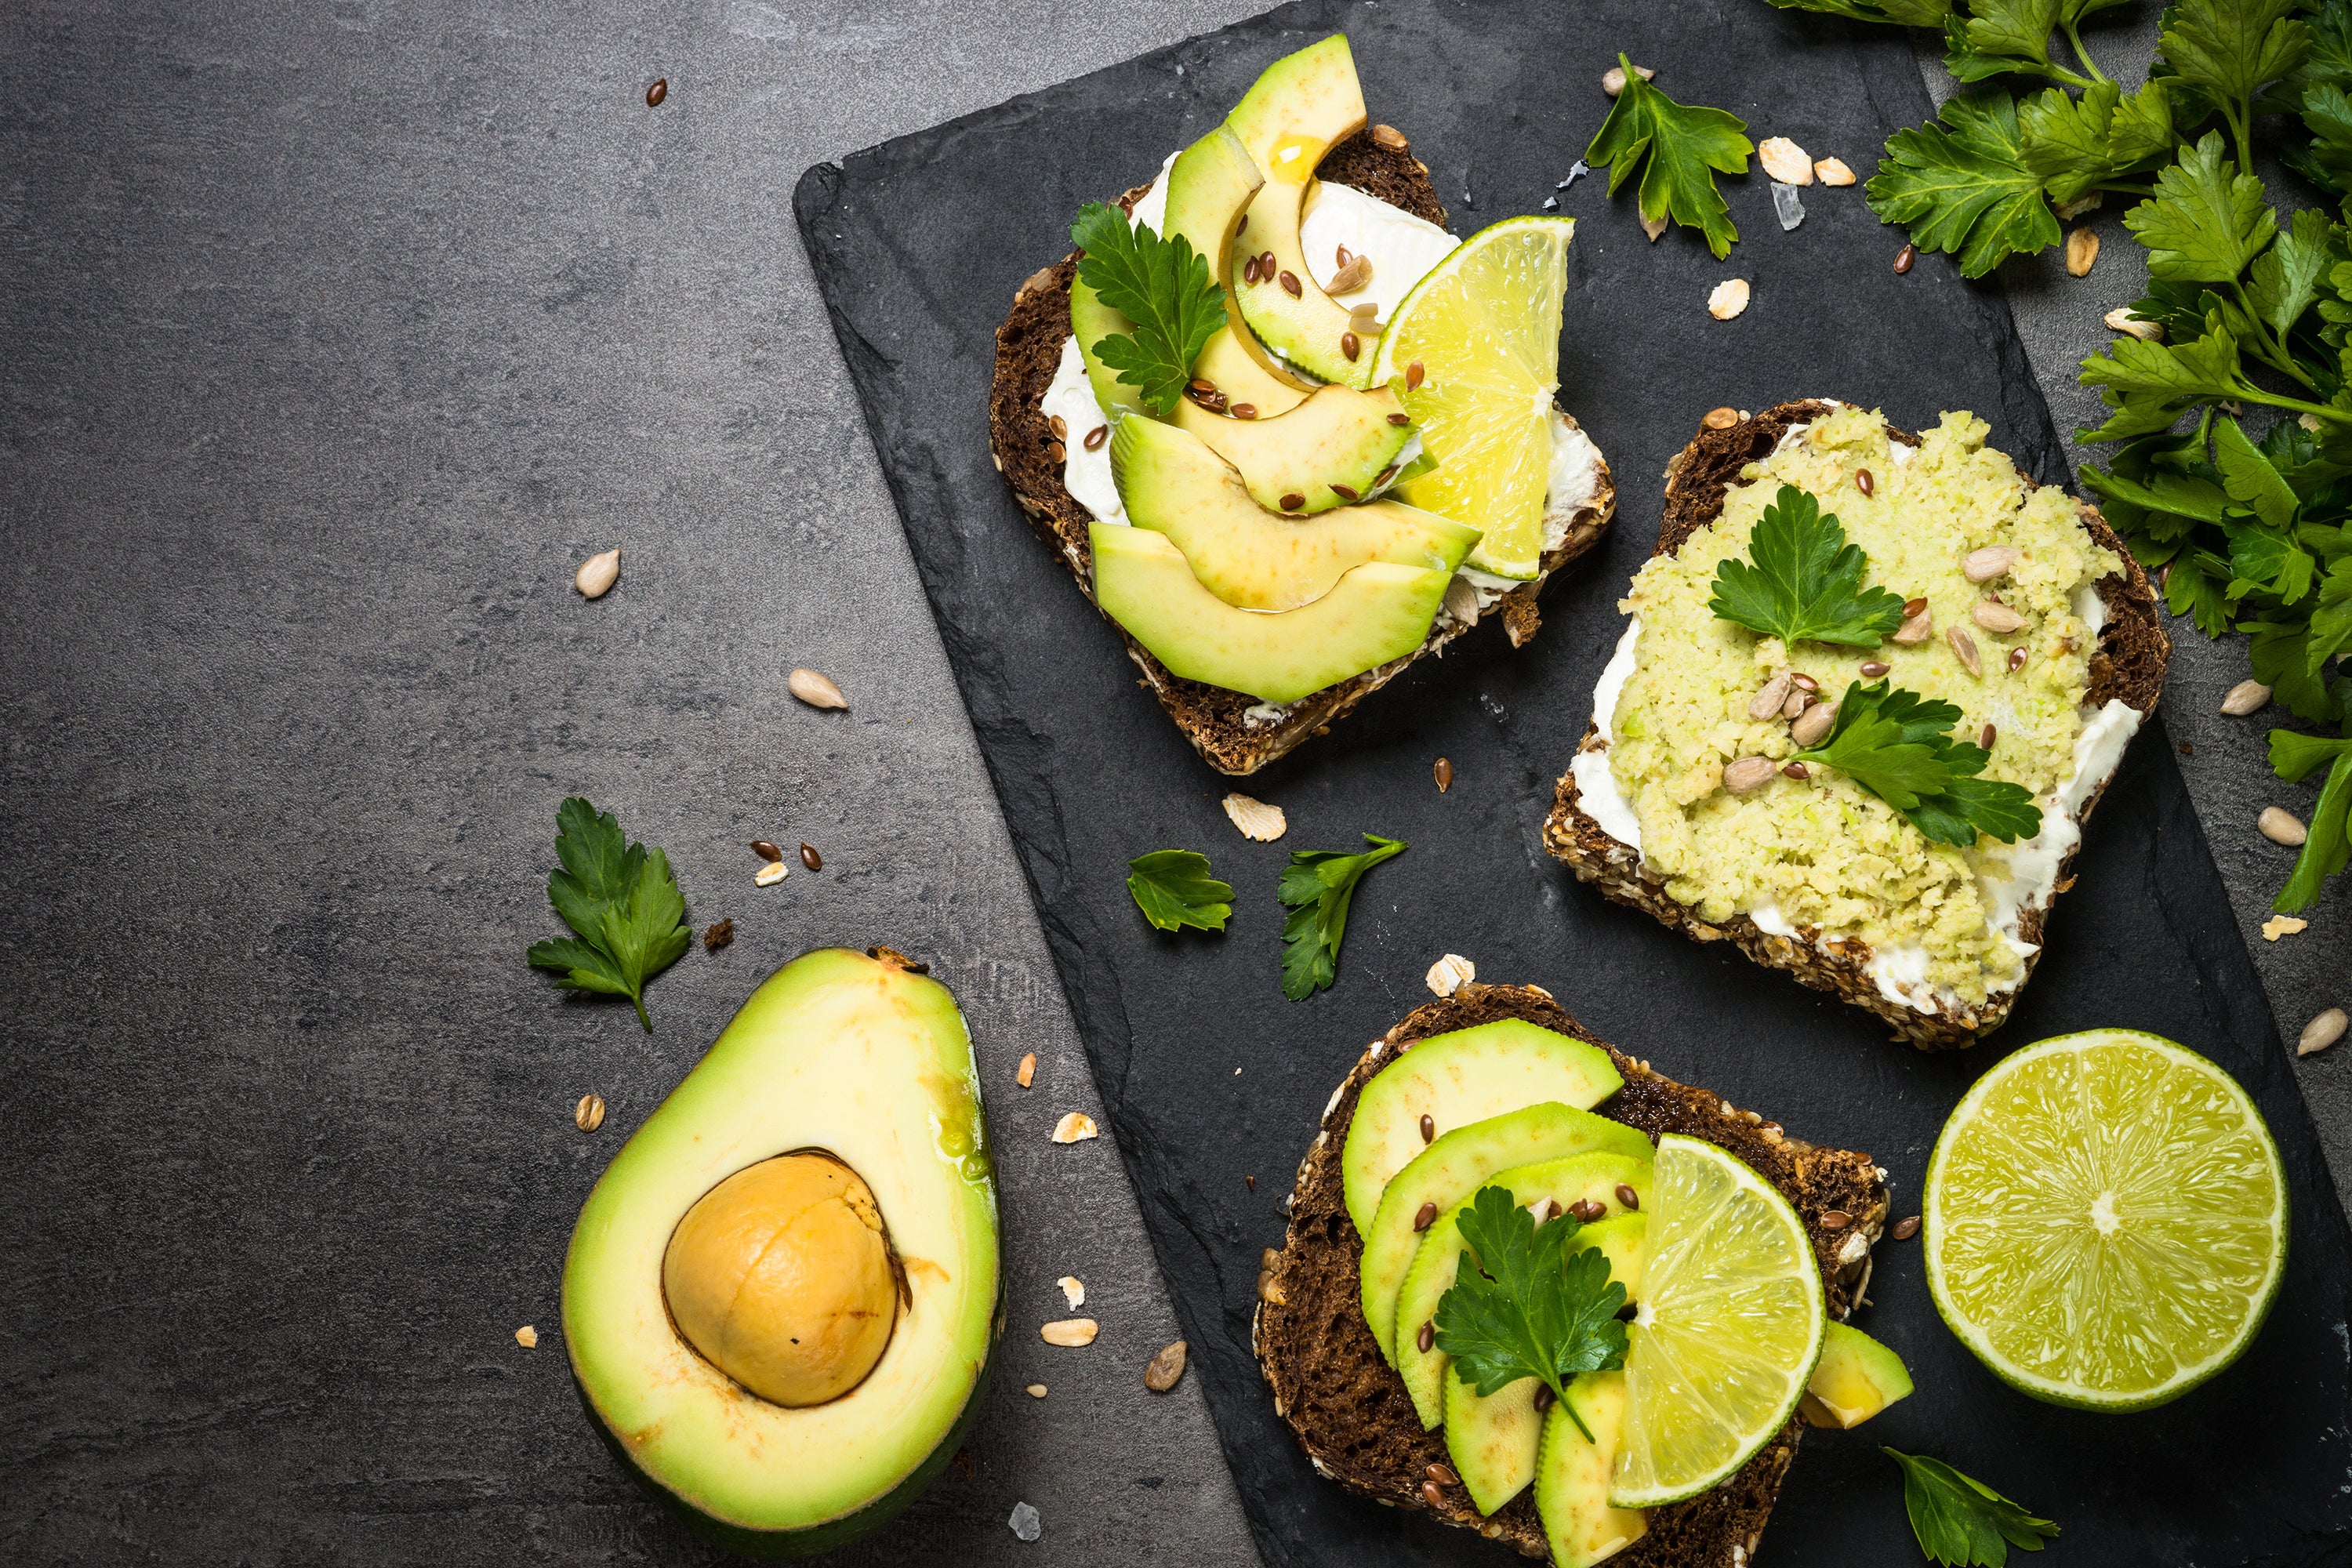 Avocado Toast is toasted bread is topped with mashed avocado and drizzled with avocado oil, then seasoned with salt and pepper.